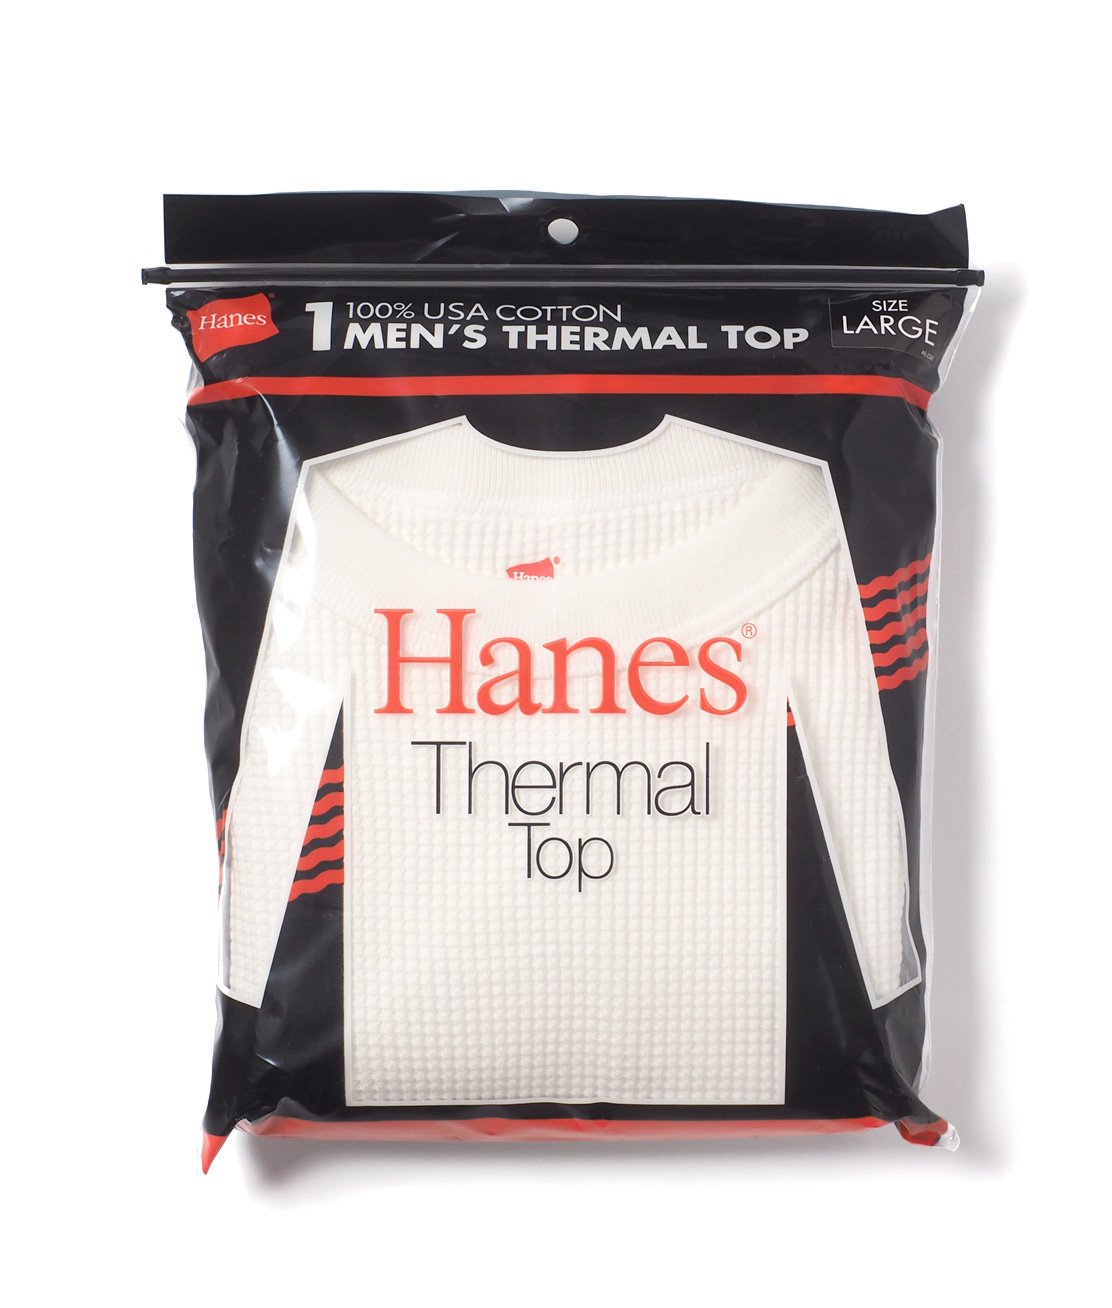 Hanes】HM4-Y203 THERMAL TOP - OFF WHITE サーマルシャツ 100% USA ...